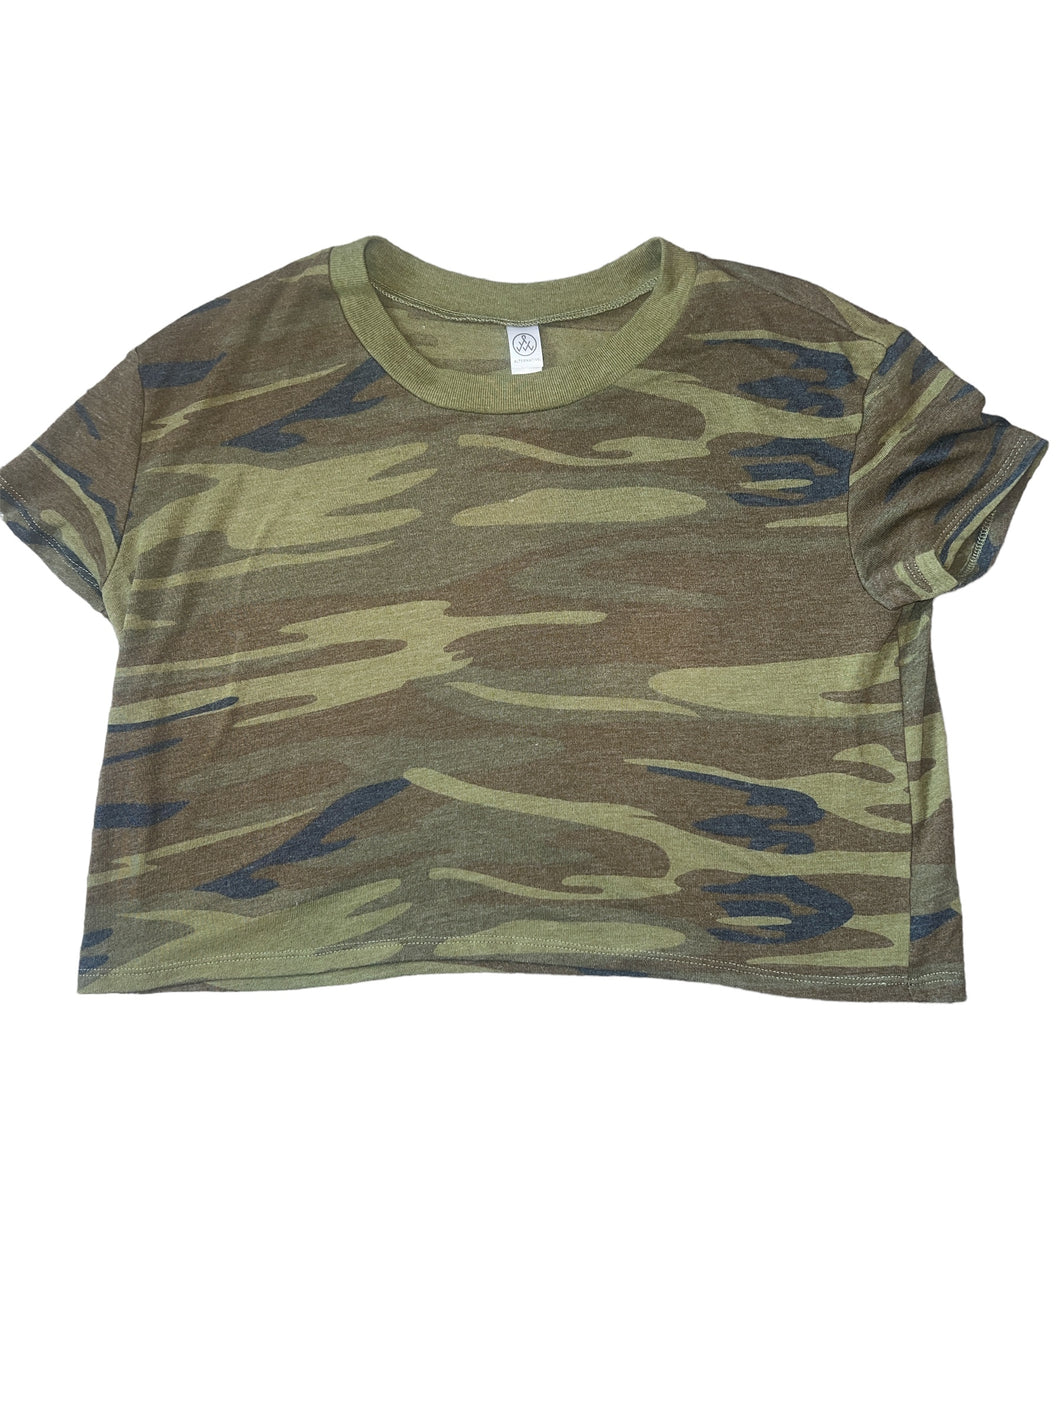 Alternative Apparel women’s cropped camouflage tee SMALL